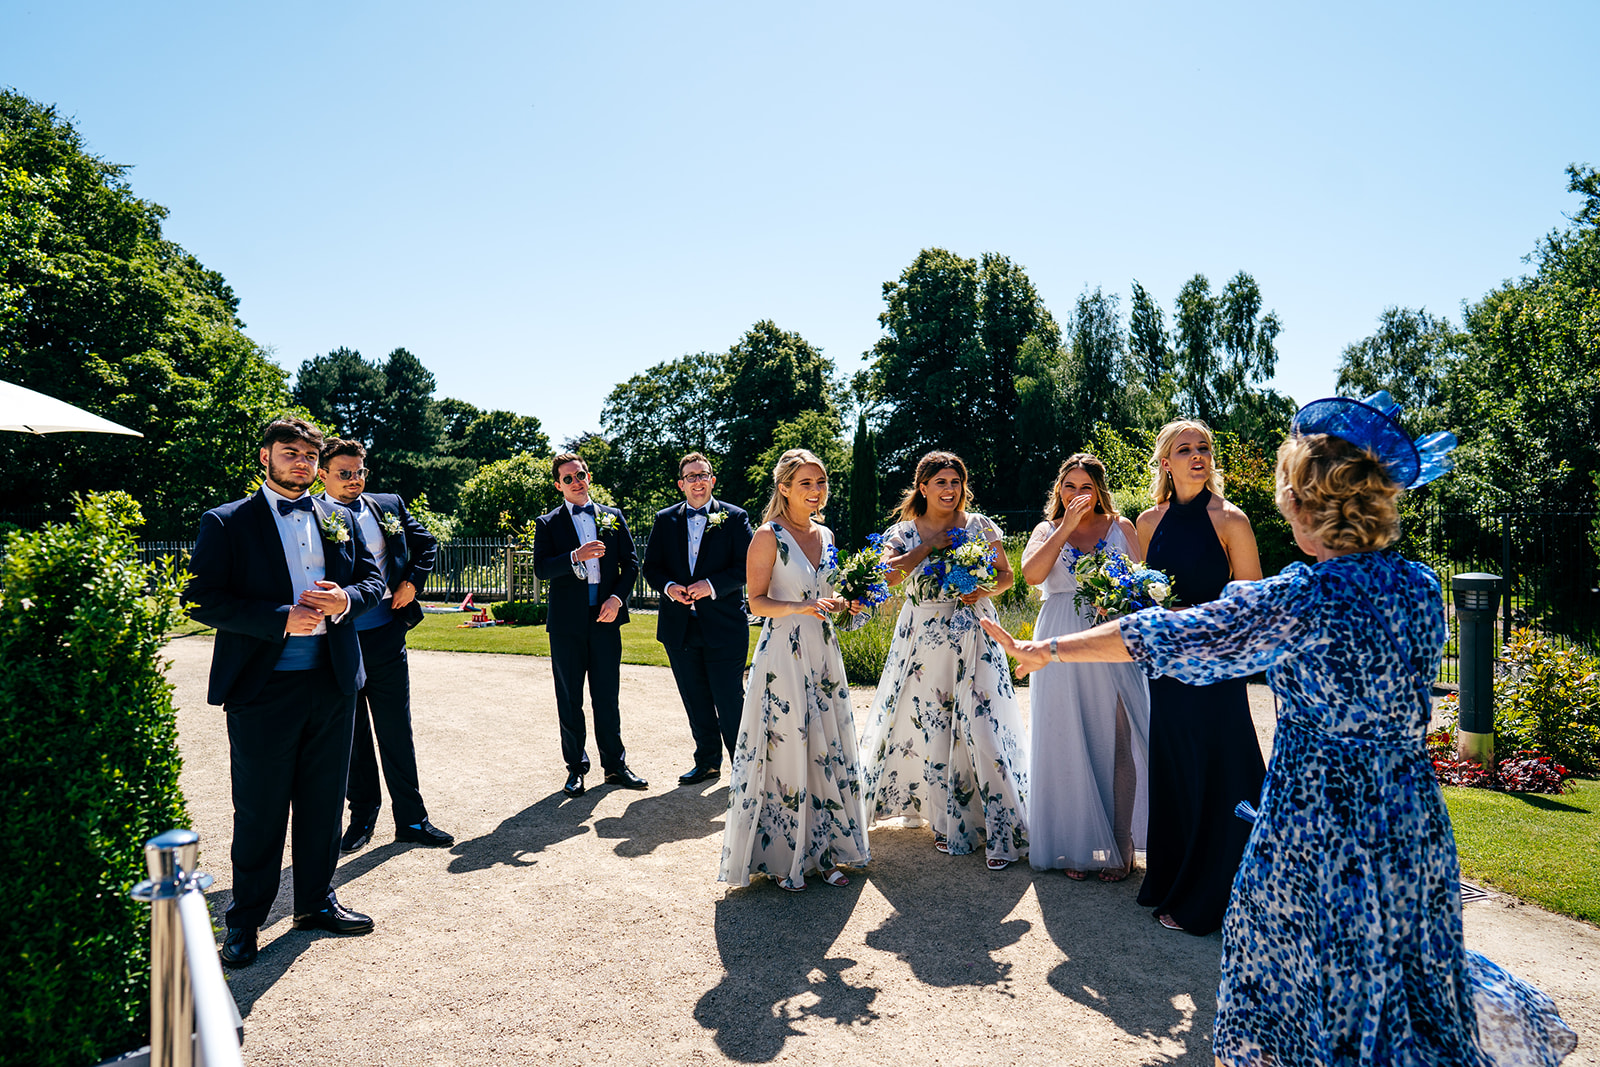 Mother of the groom welcomes wedding party at Sefton Park Palm House Wedding in Liverpool on a scorching hot summer's day